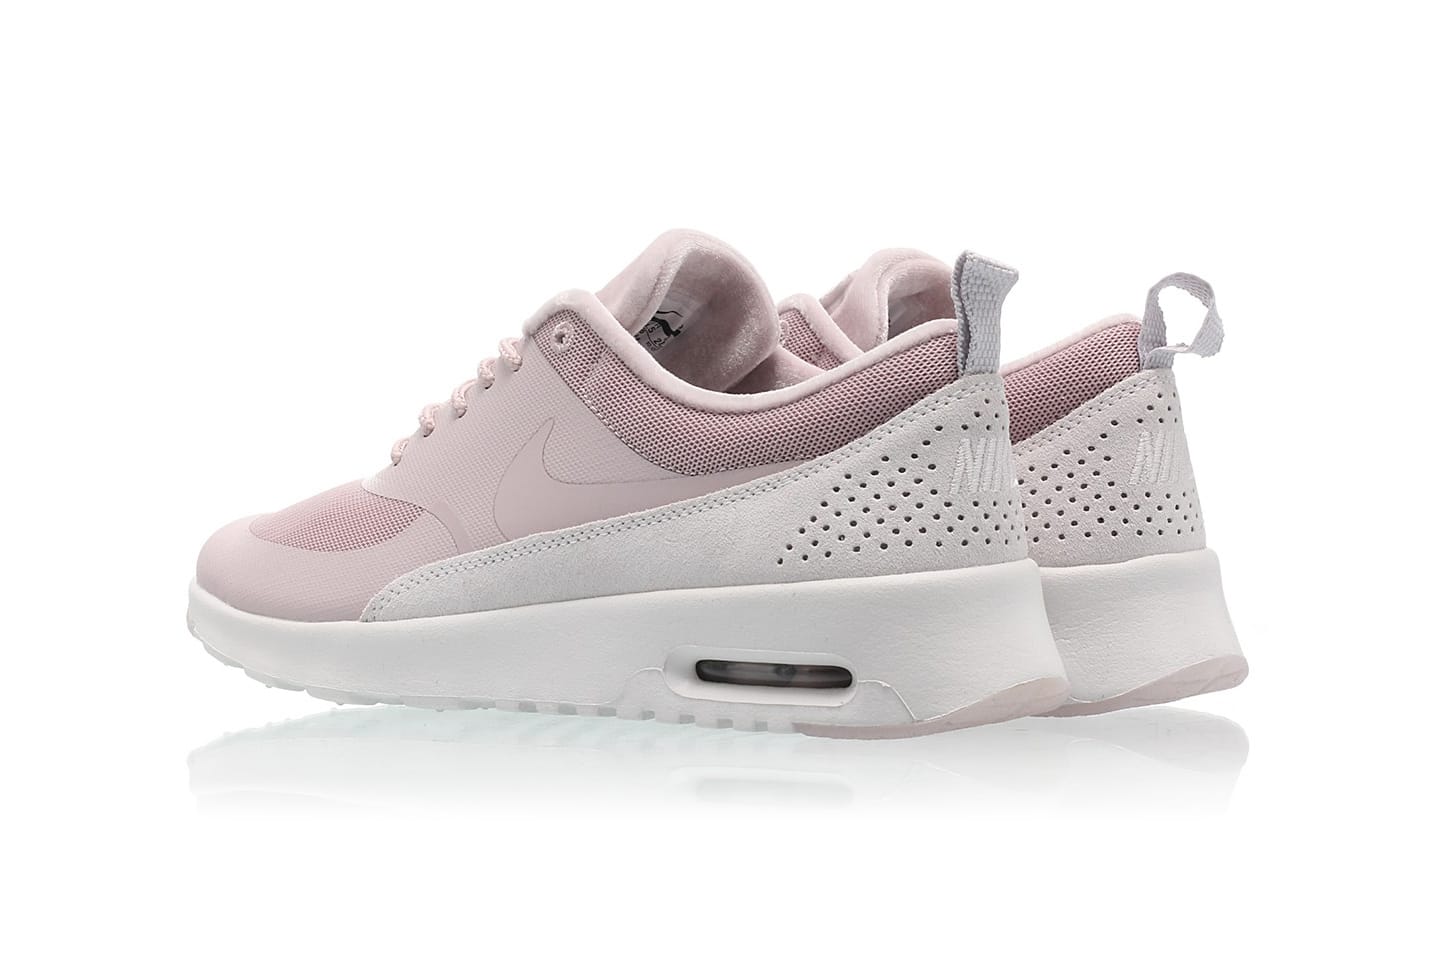 Nike Air Max Thea LX in Particle Rose 